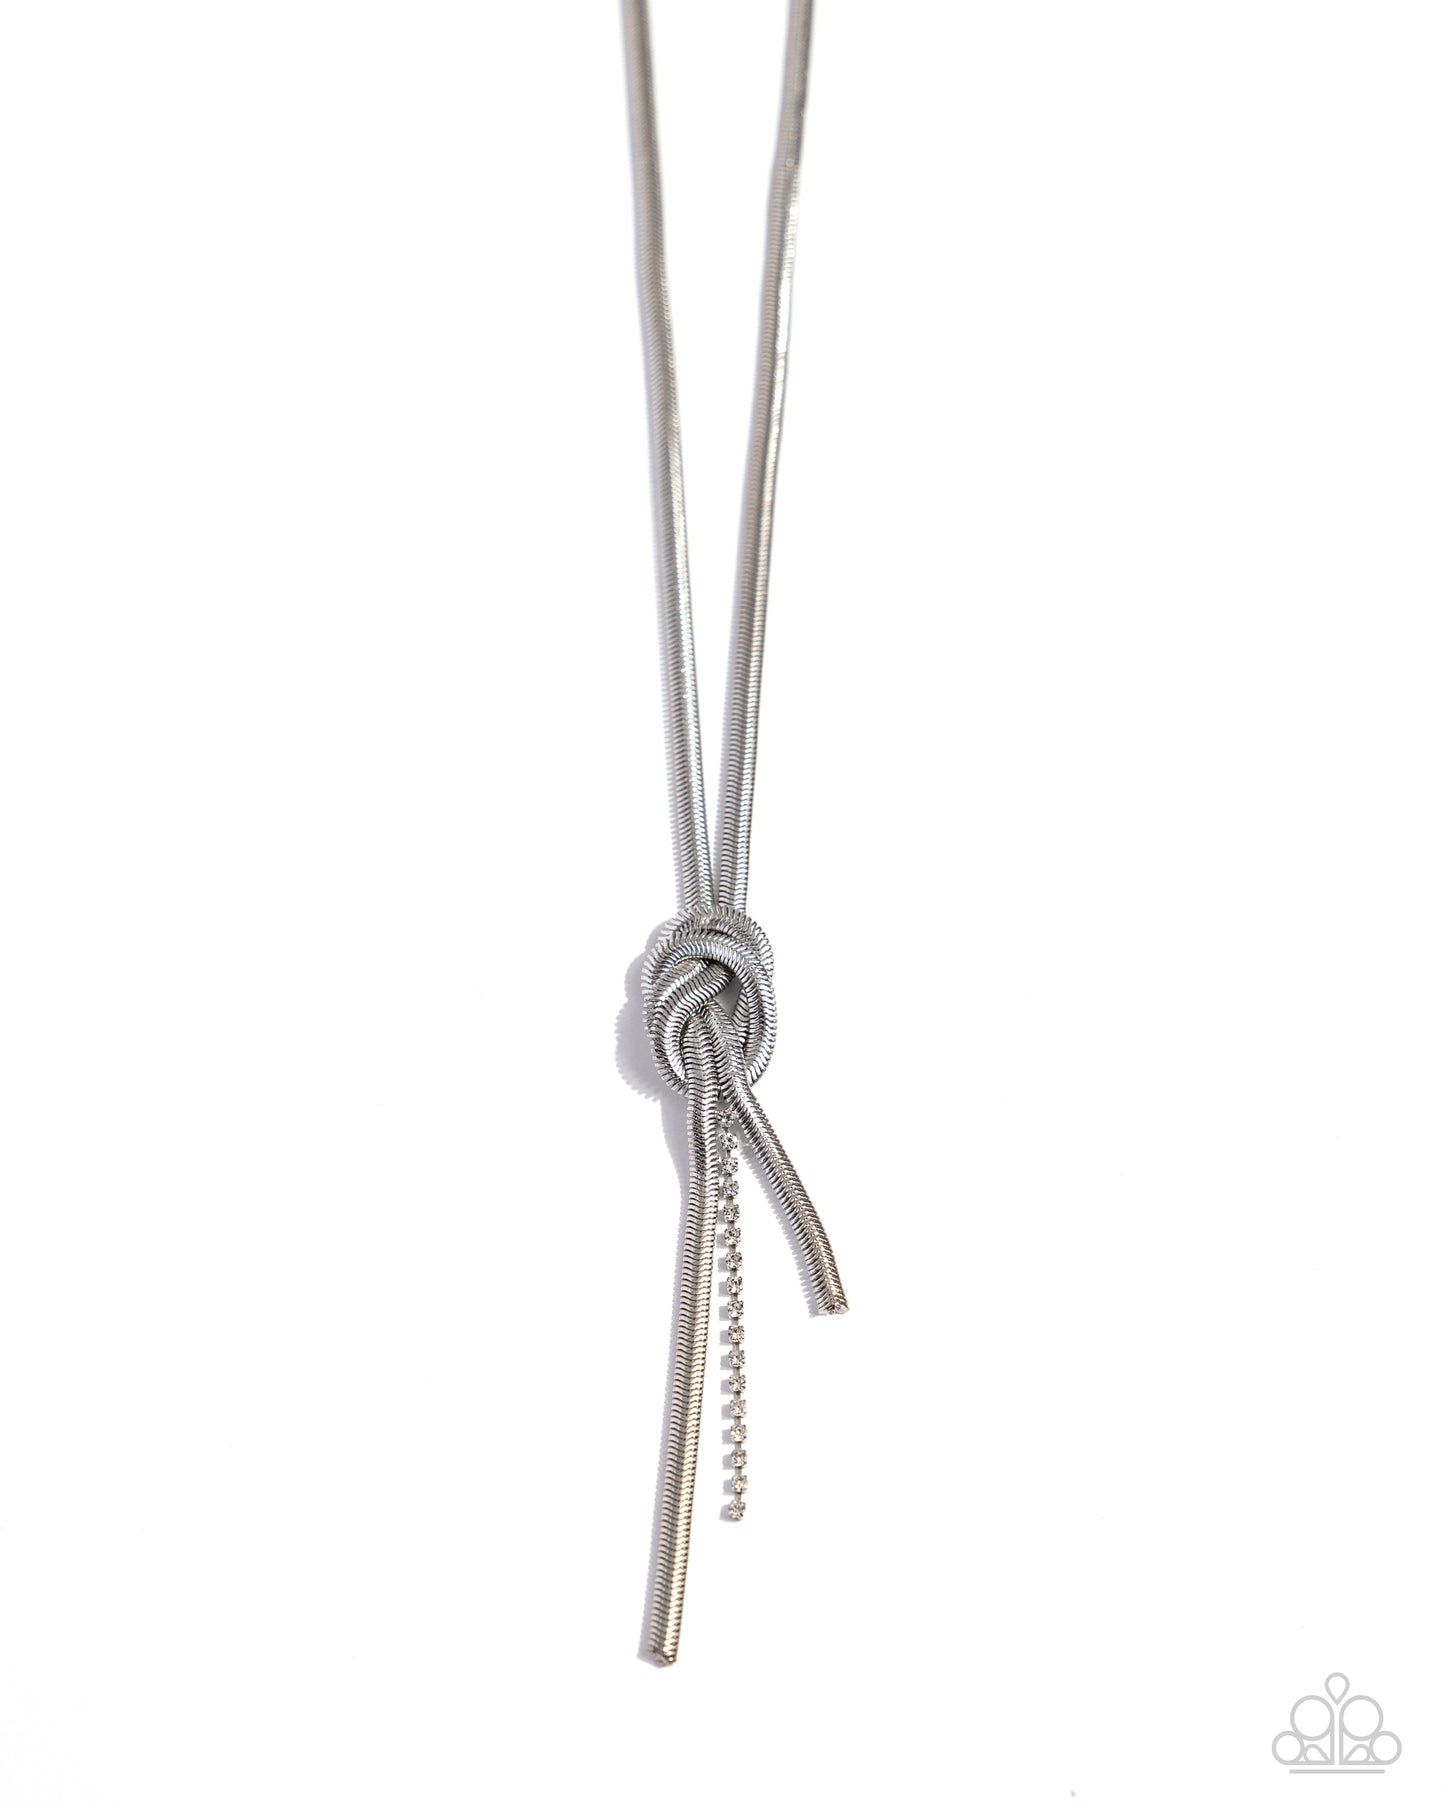 <p>An edgy collection of silver snake chains knot into an intense fringe, creating a bold industrial look. A dainty strand of white rhinestones emerges from the knot for a surprising hint of shimmery movement. Features an adjustable clasp closure.</p> <p><i> Sold as one individual necklace. Includes one pair of matching earrings.</i></p>